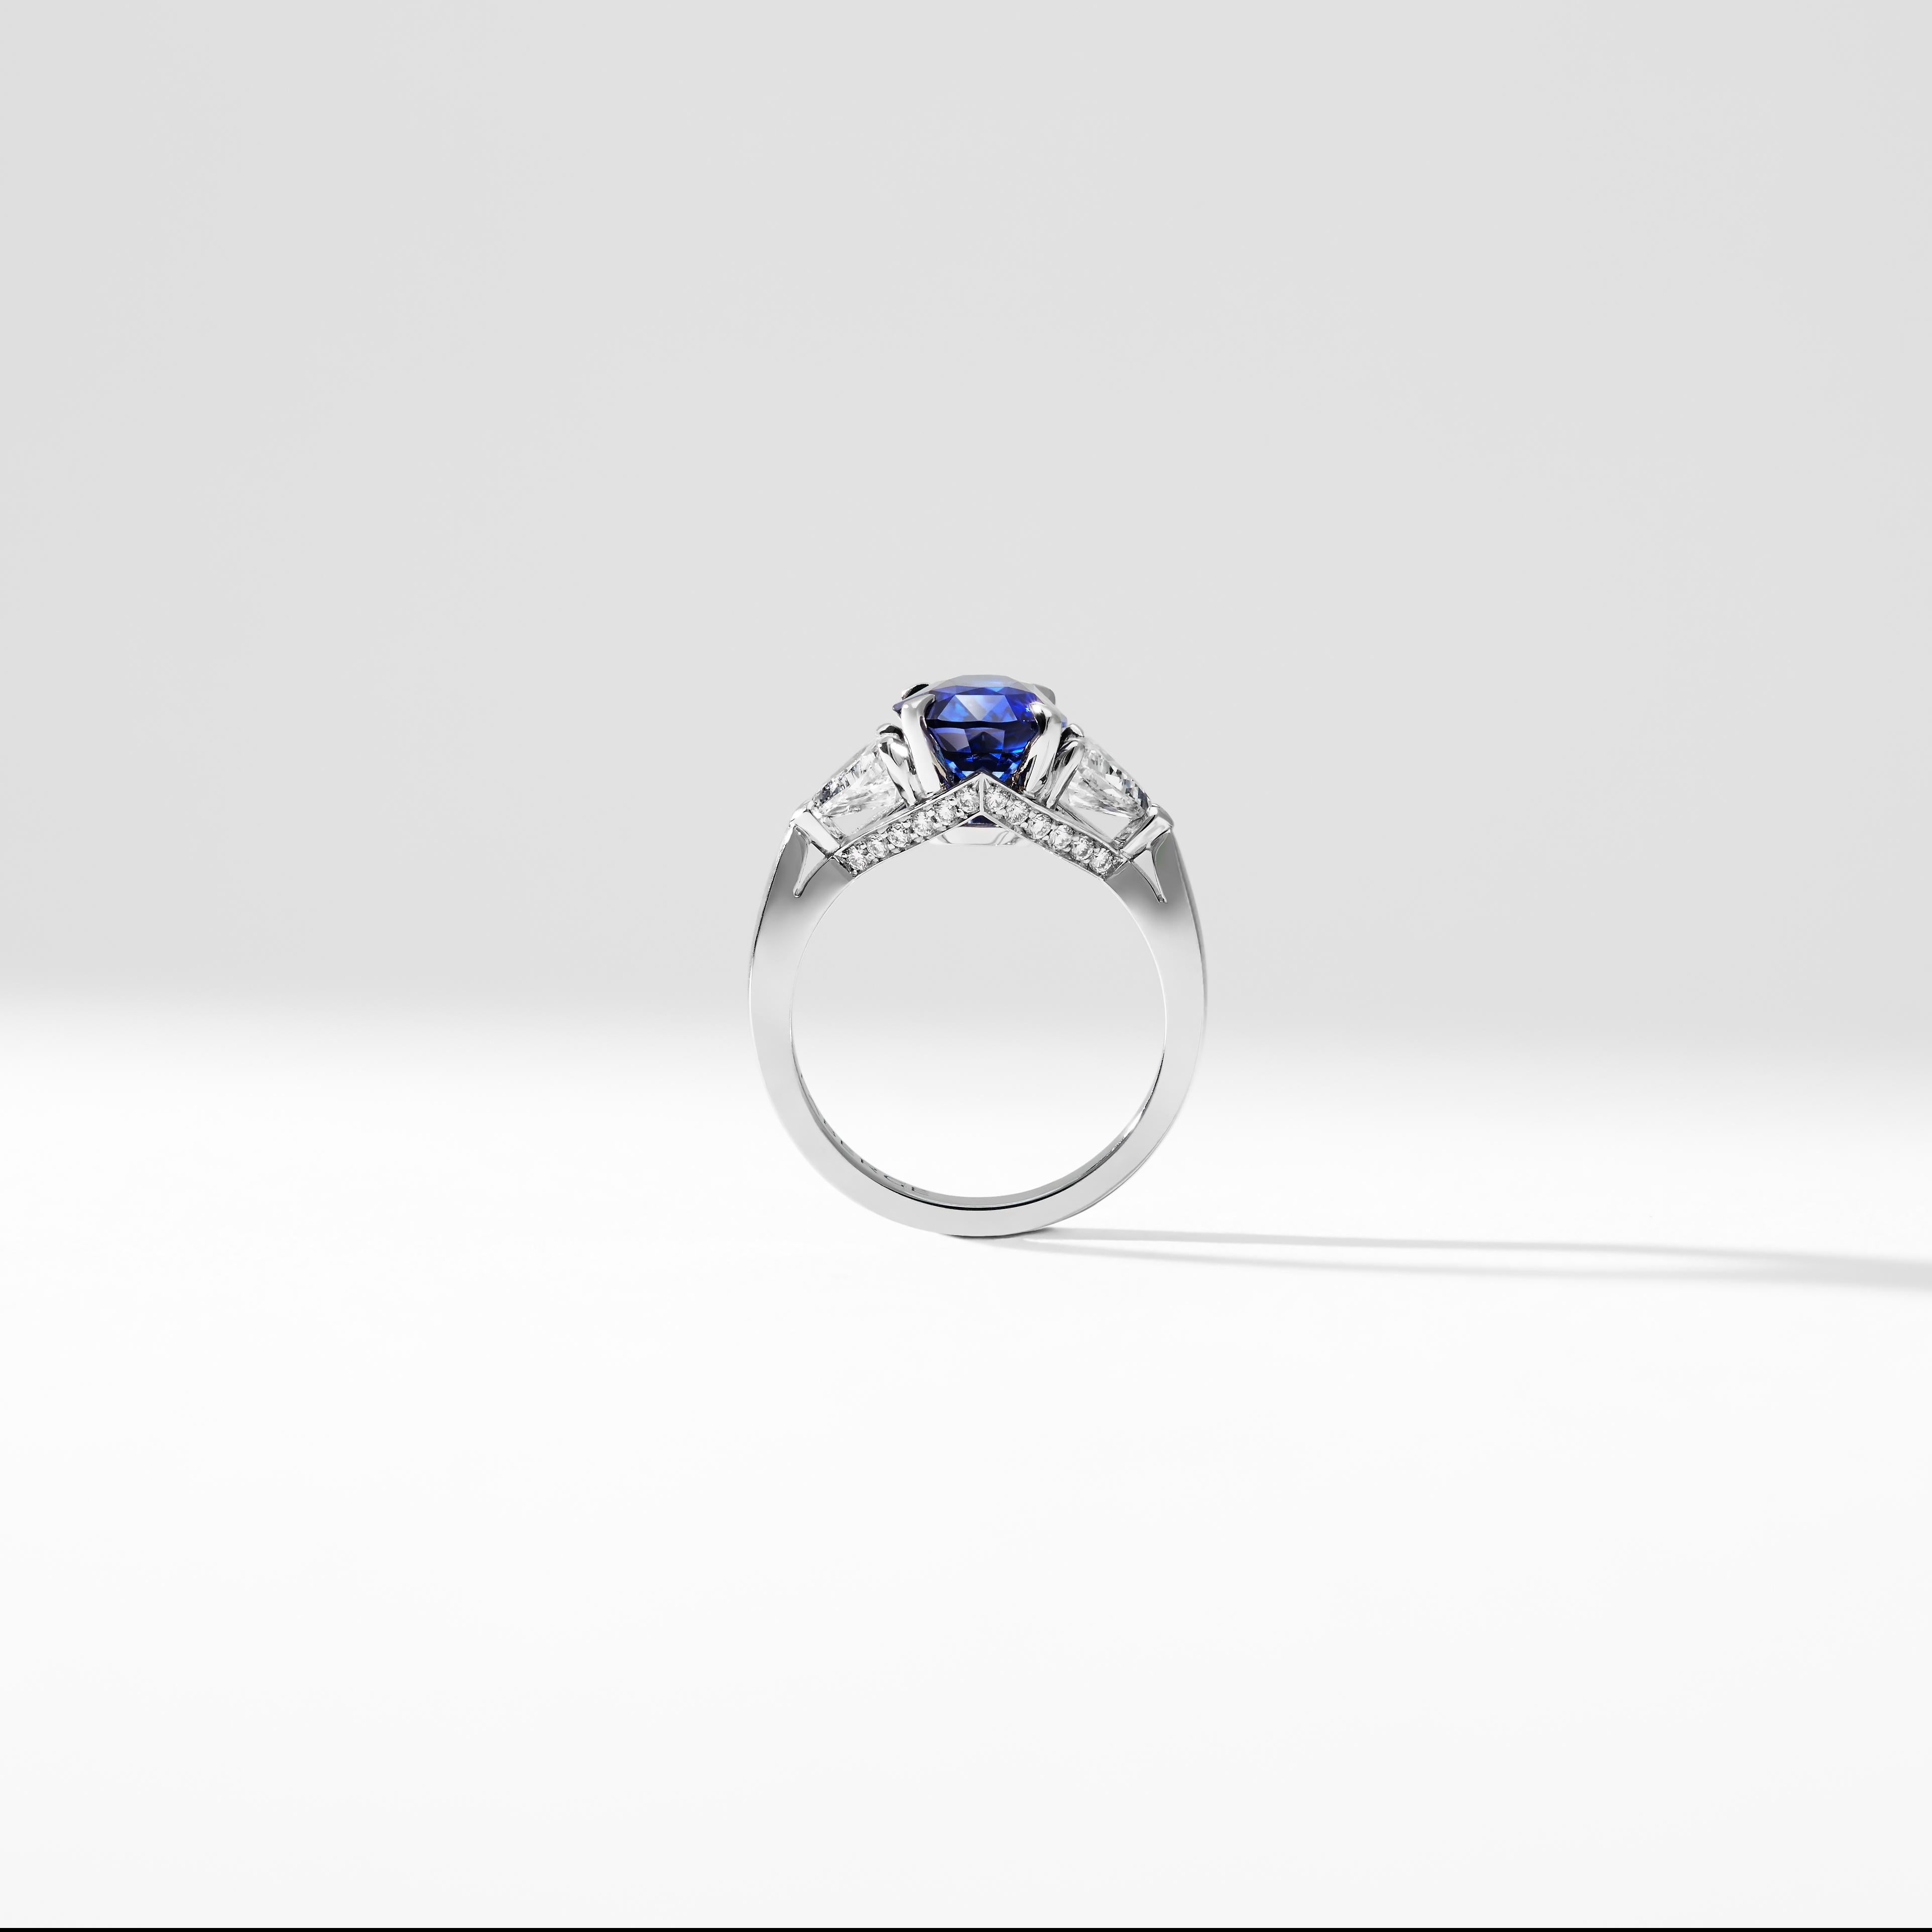 Fabergé Platinum Oval 5.12ct Royal Blue Sapphire Ring Set With White Diamonds For Sale 3